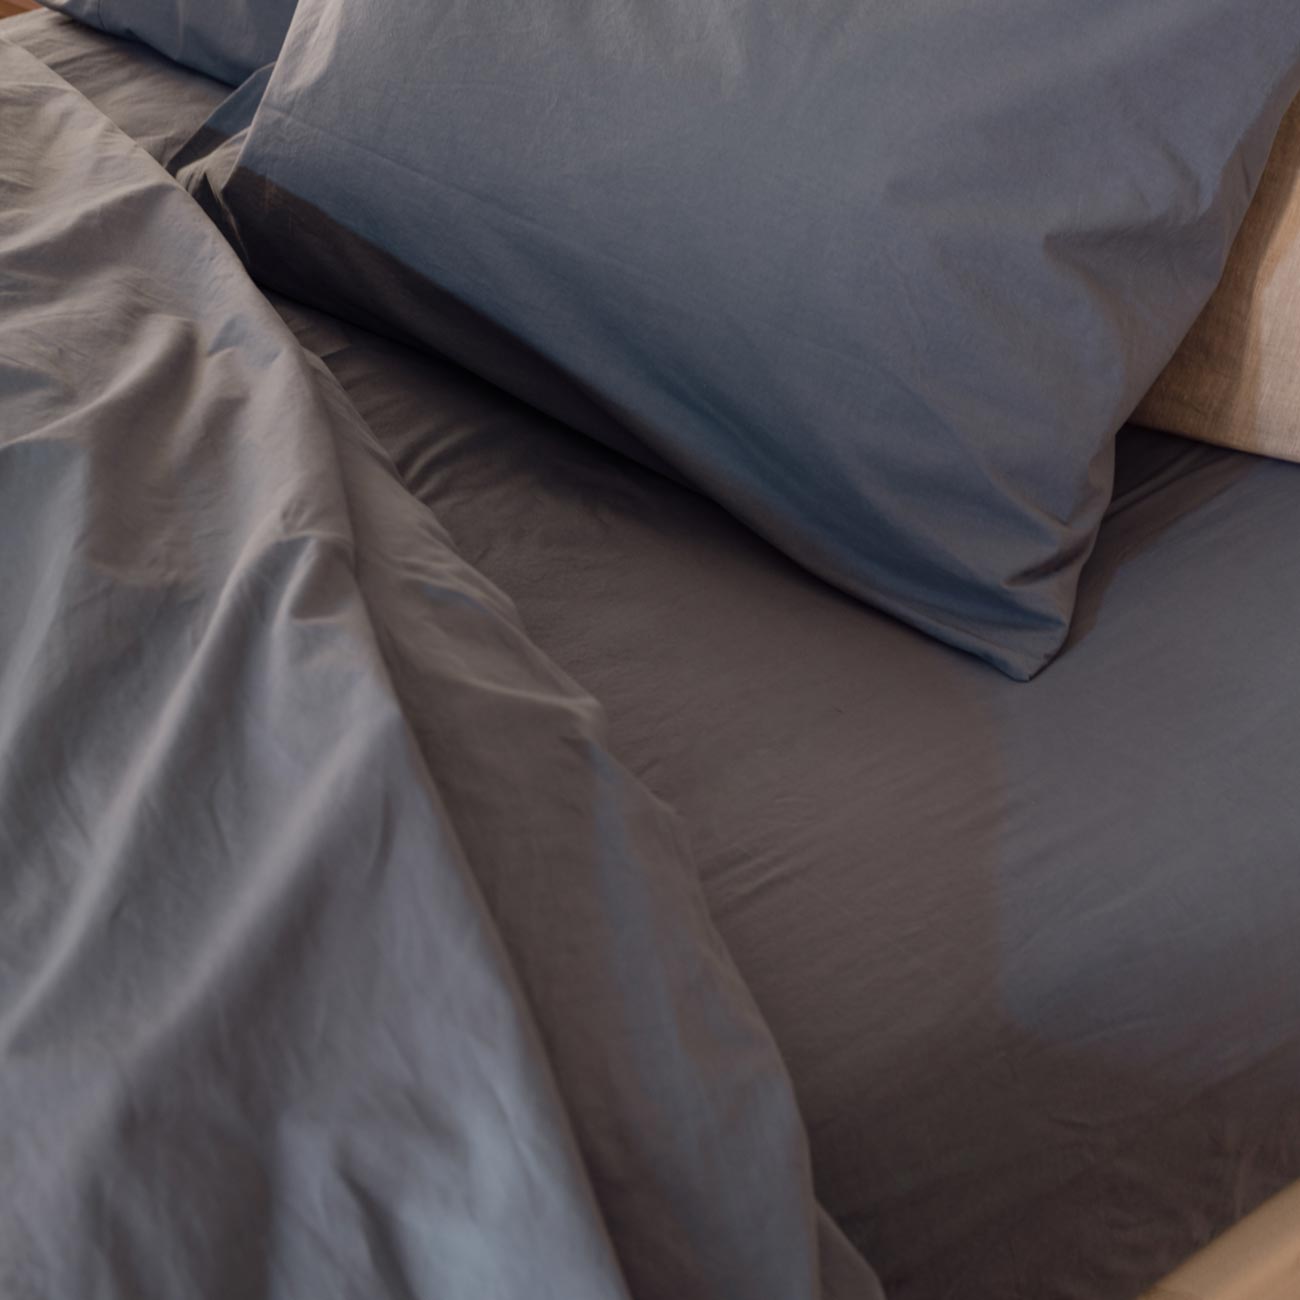 Cove Blue Washed Percale Cotton Fitted Sheet